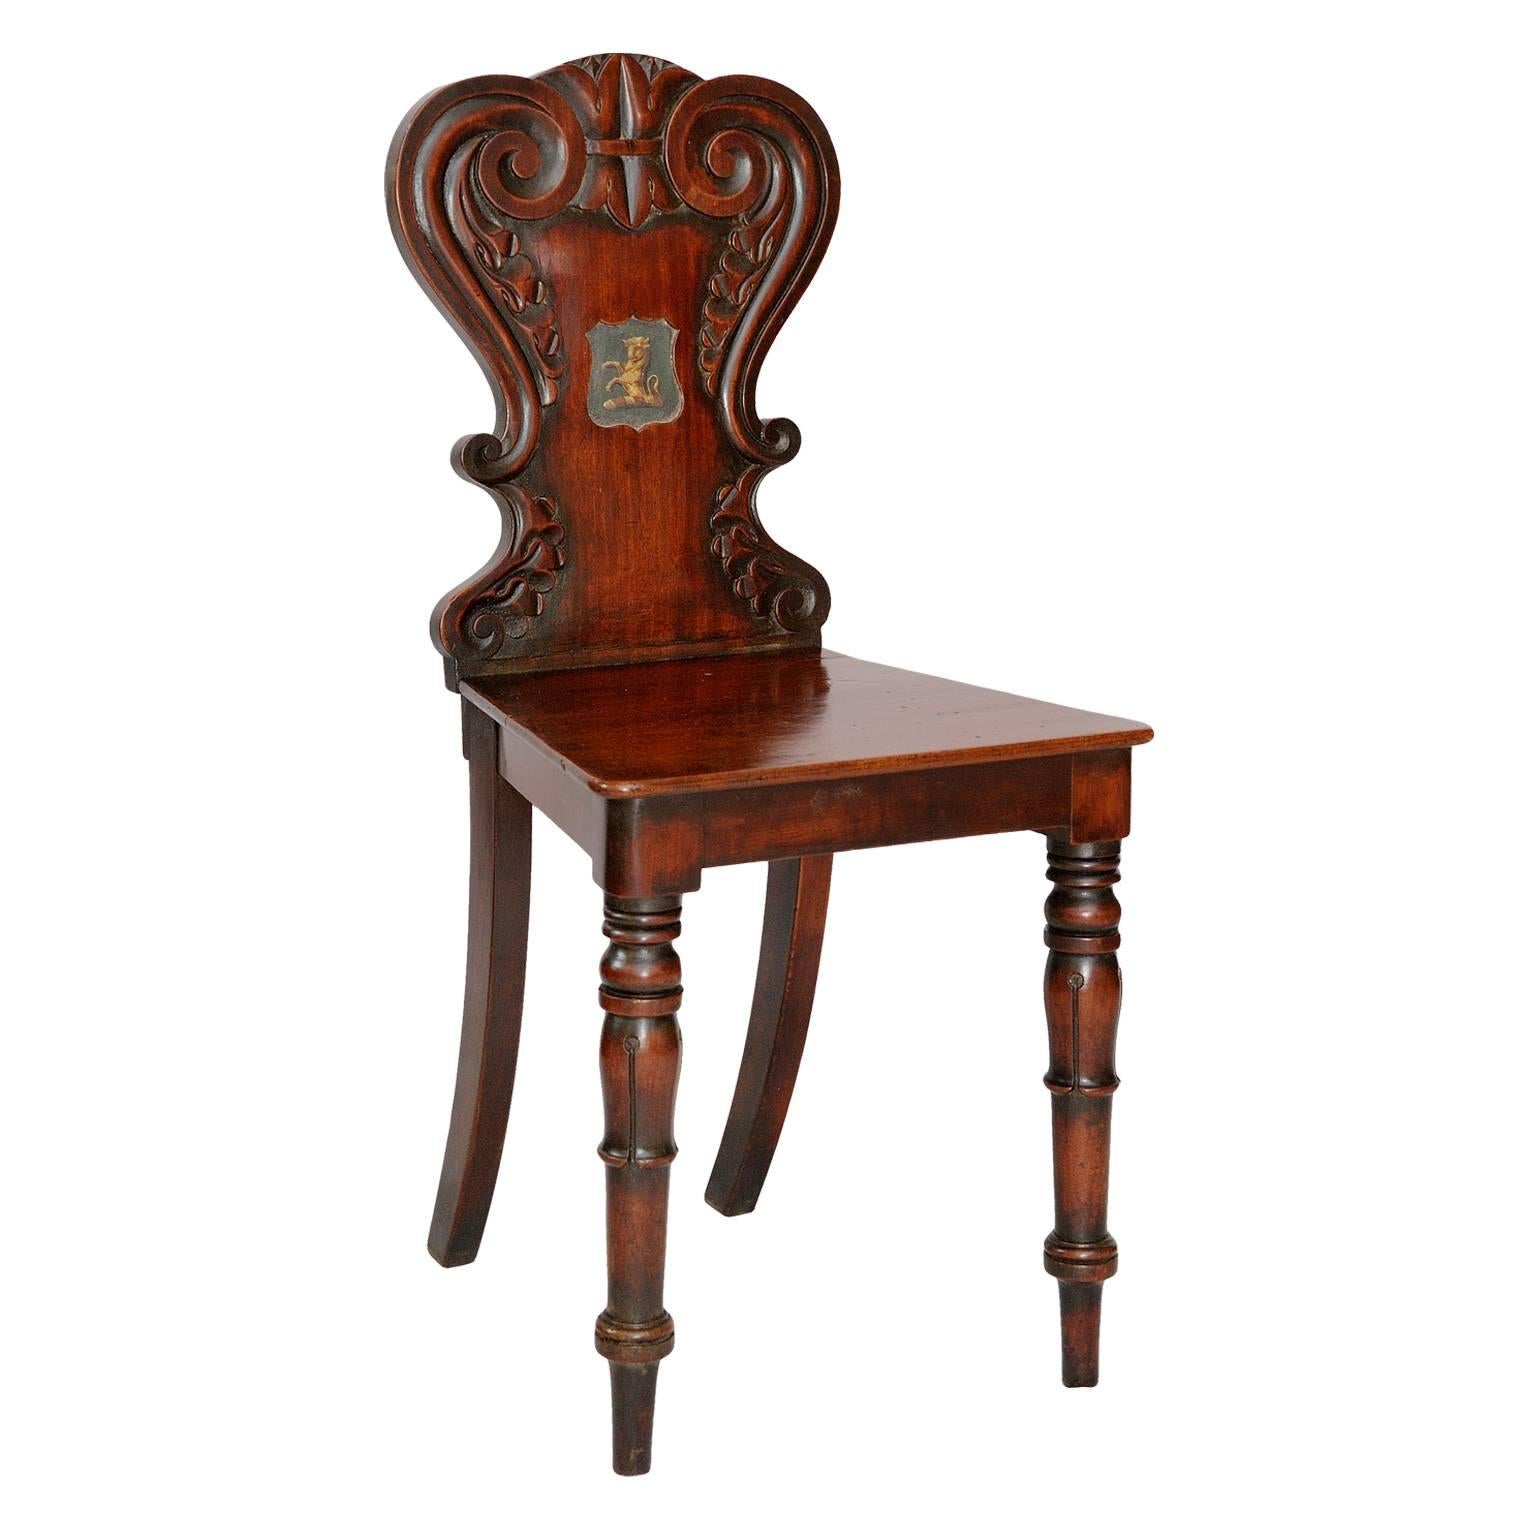 This is a beautiful pair of good quality mahogany late Regency early 19th century English hall chairs, retaining their original painted armorial crest to the back, of a rampant bull (possibly for a family whose name started with Bull ie. Bullman,